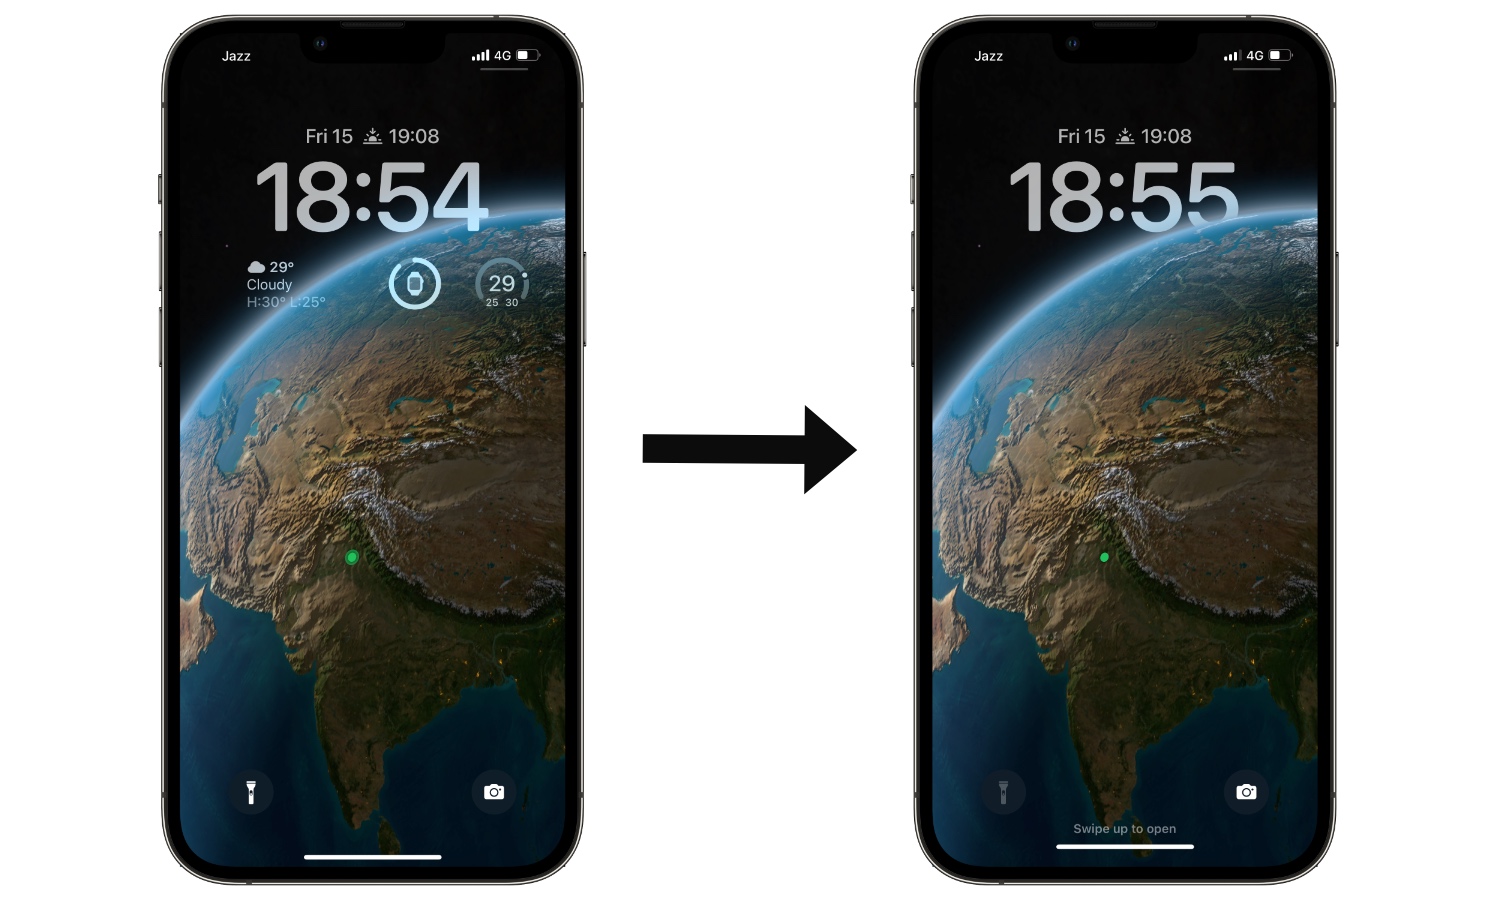 How To Get Multilayered Clock Effect On iPhone Lock Screen - iOS Hacker